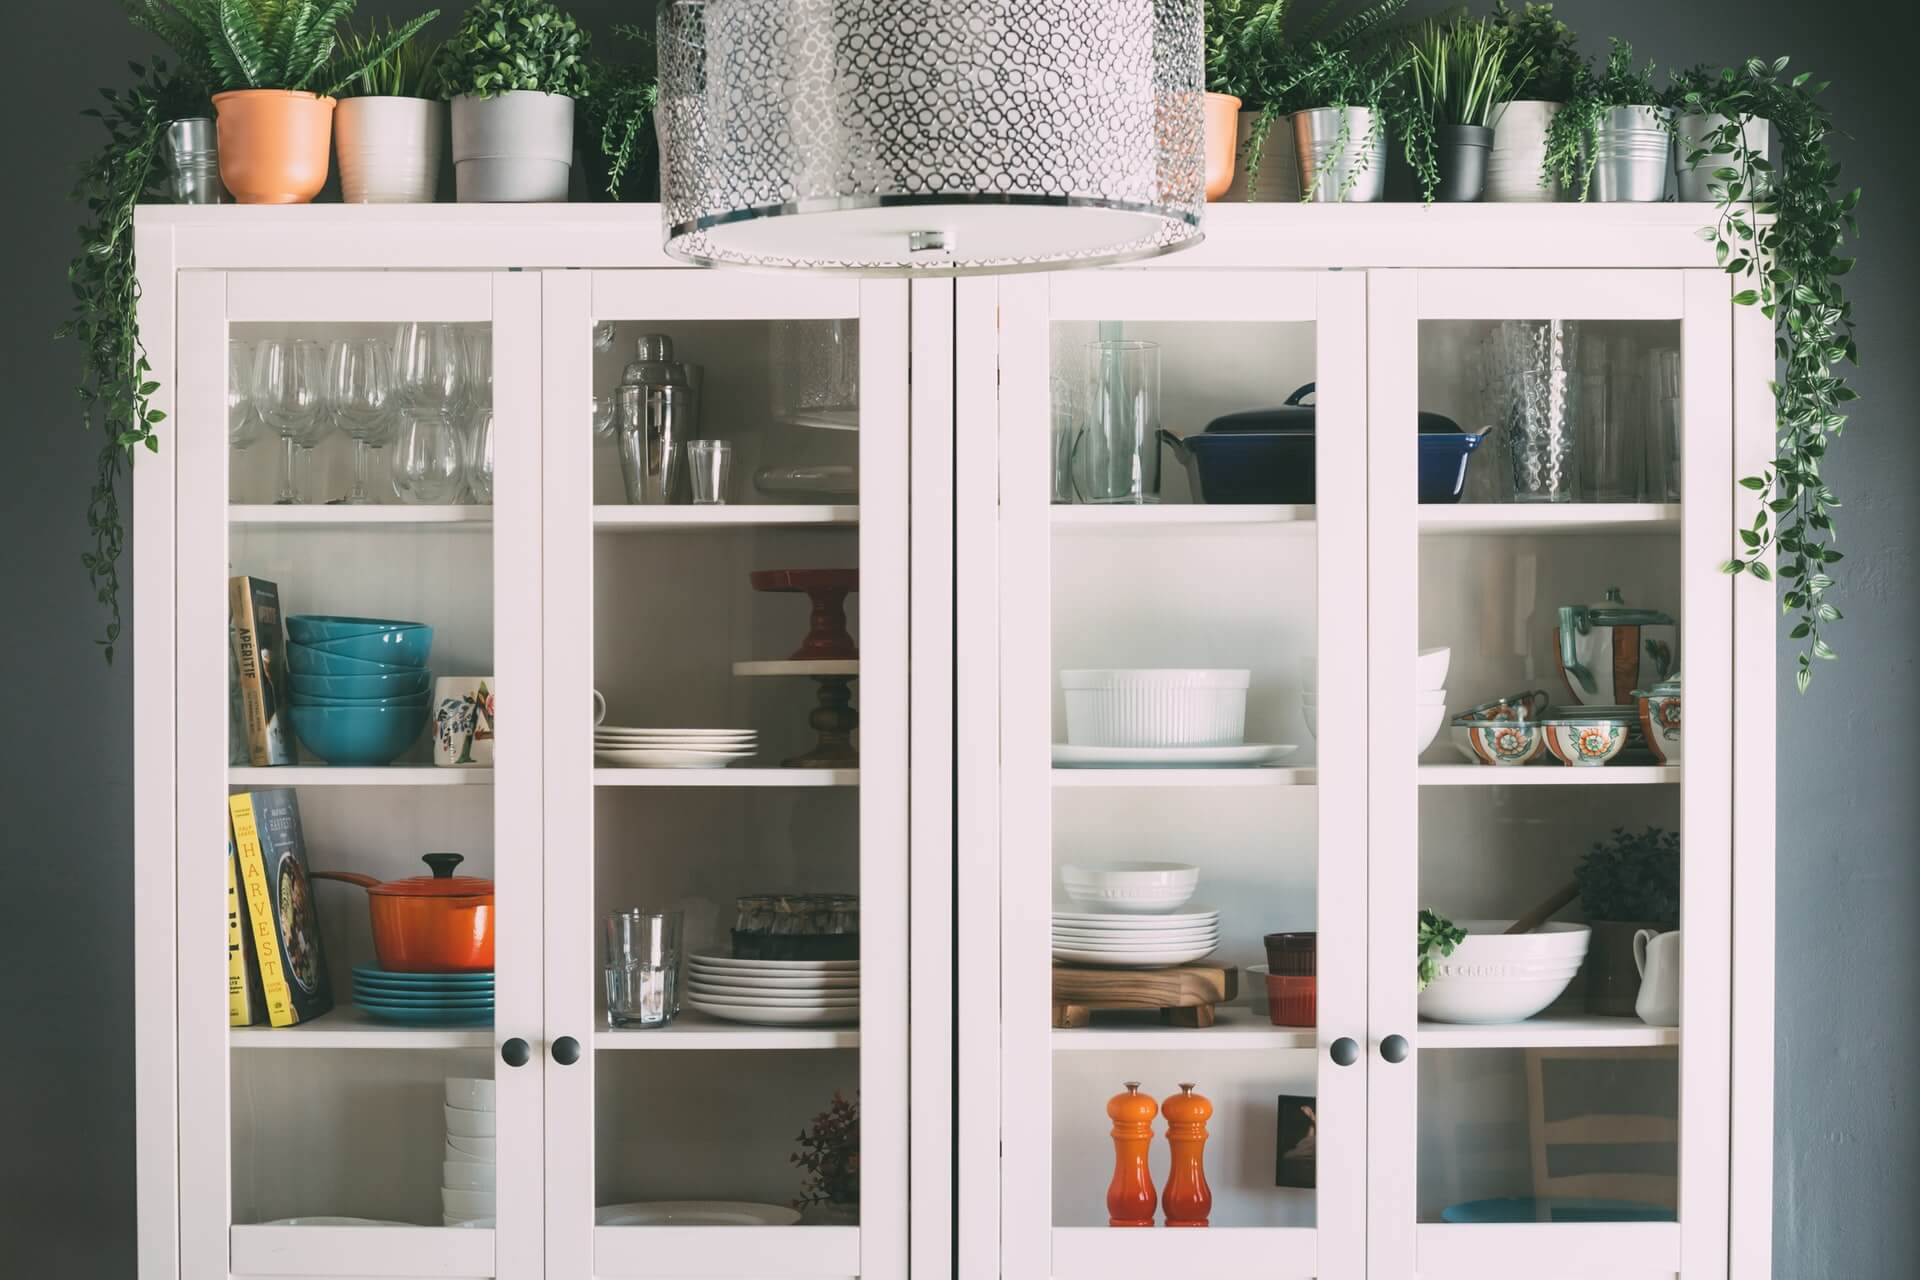 Pantry Do’s and Don’ts